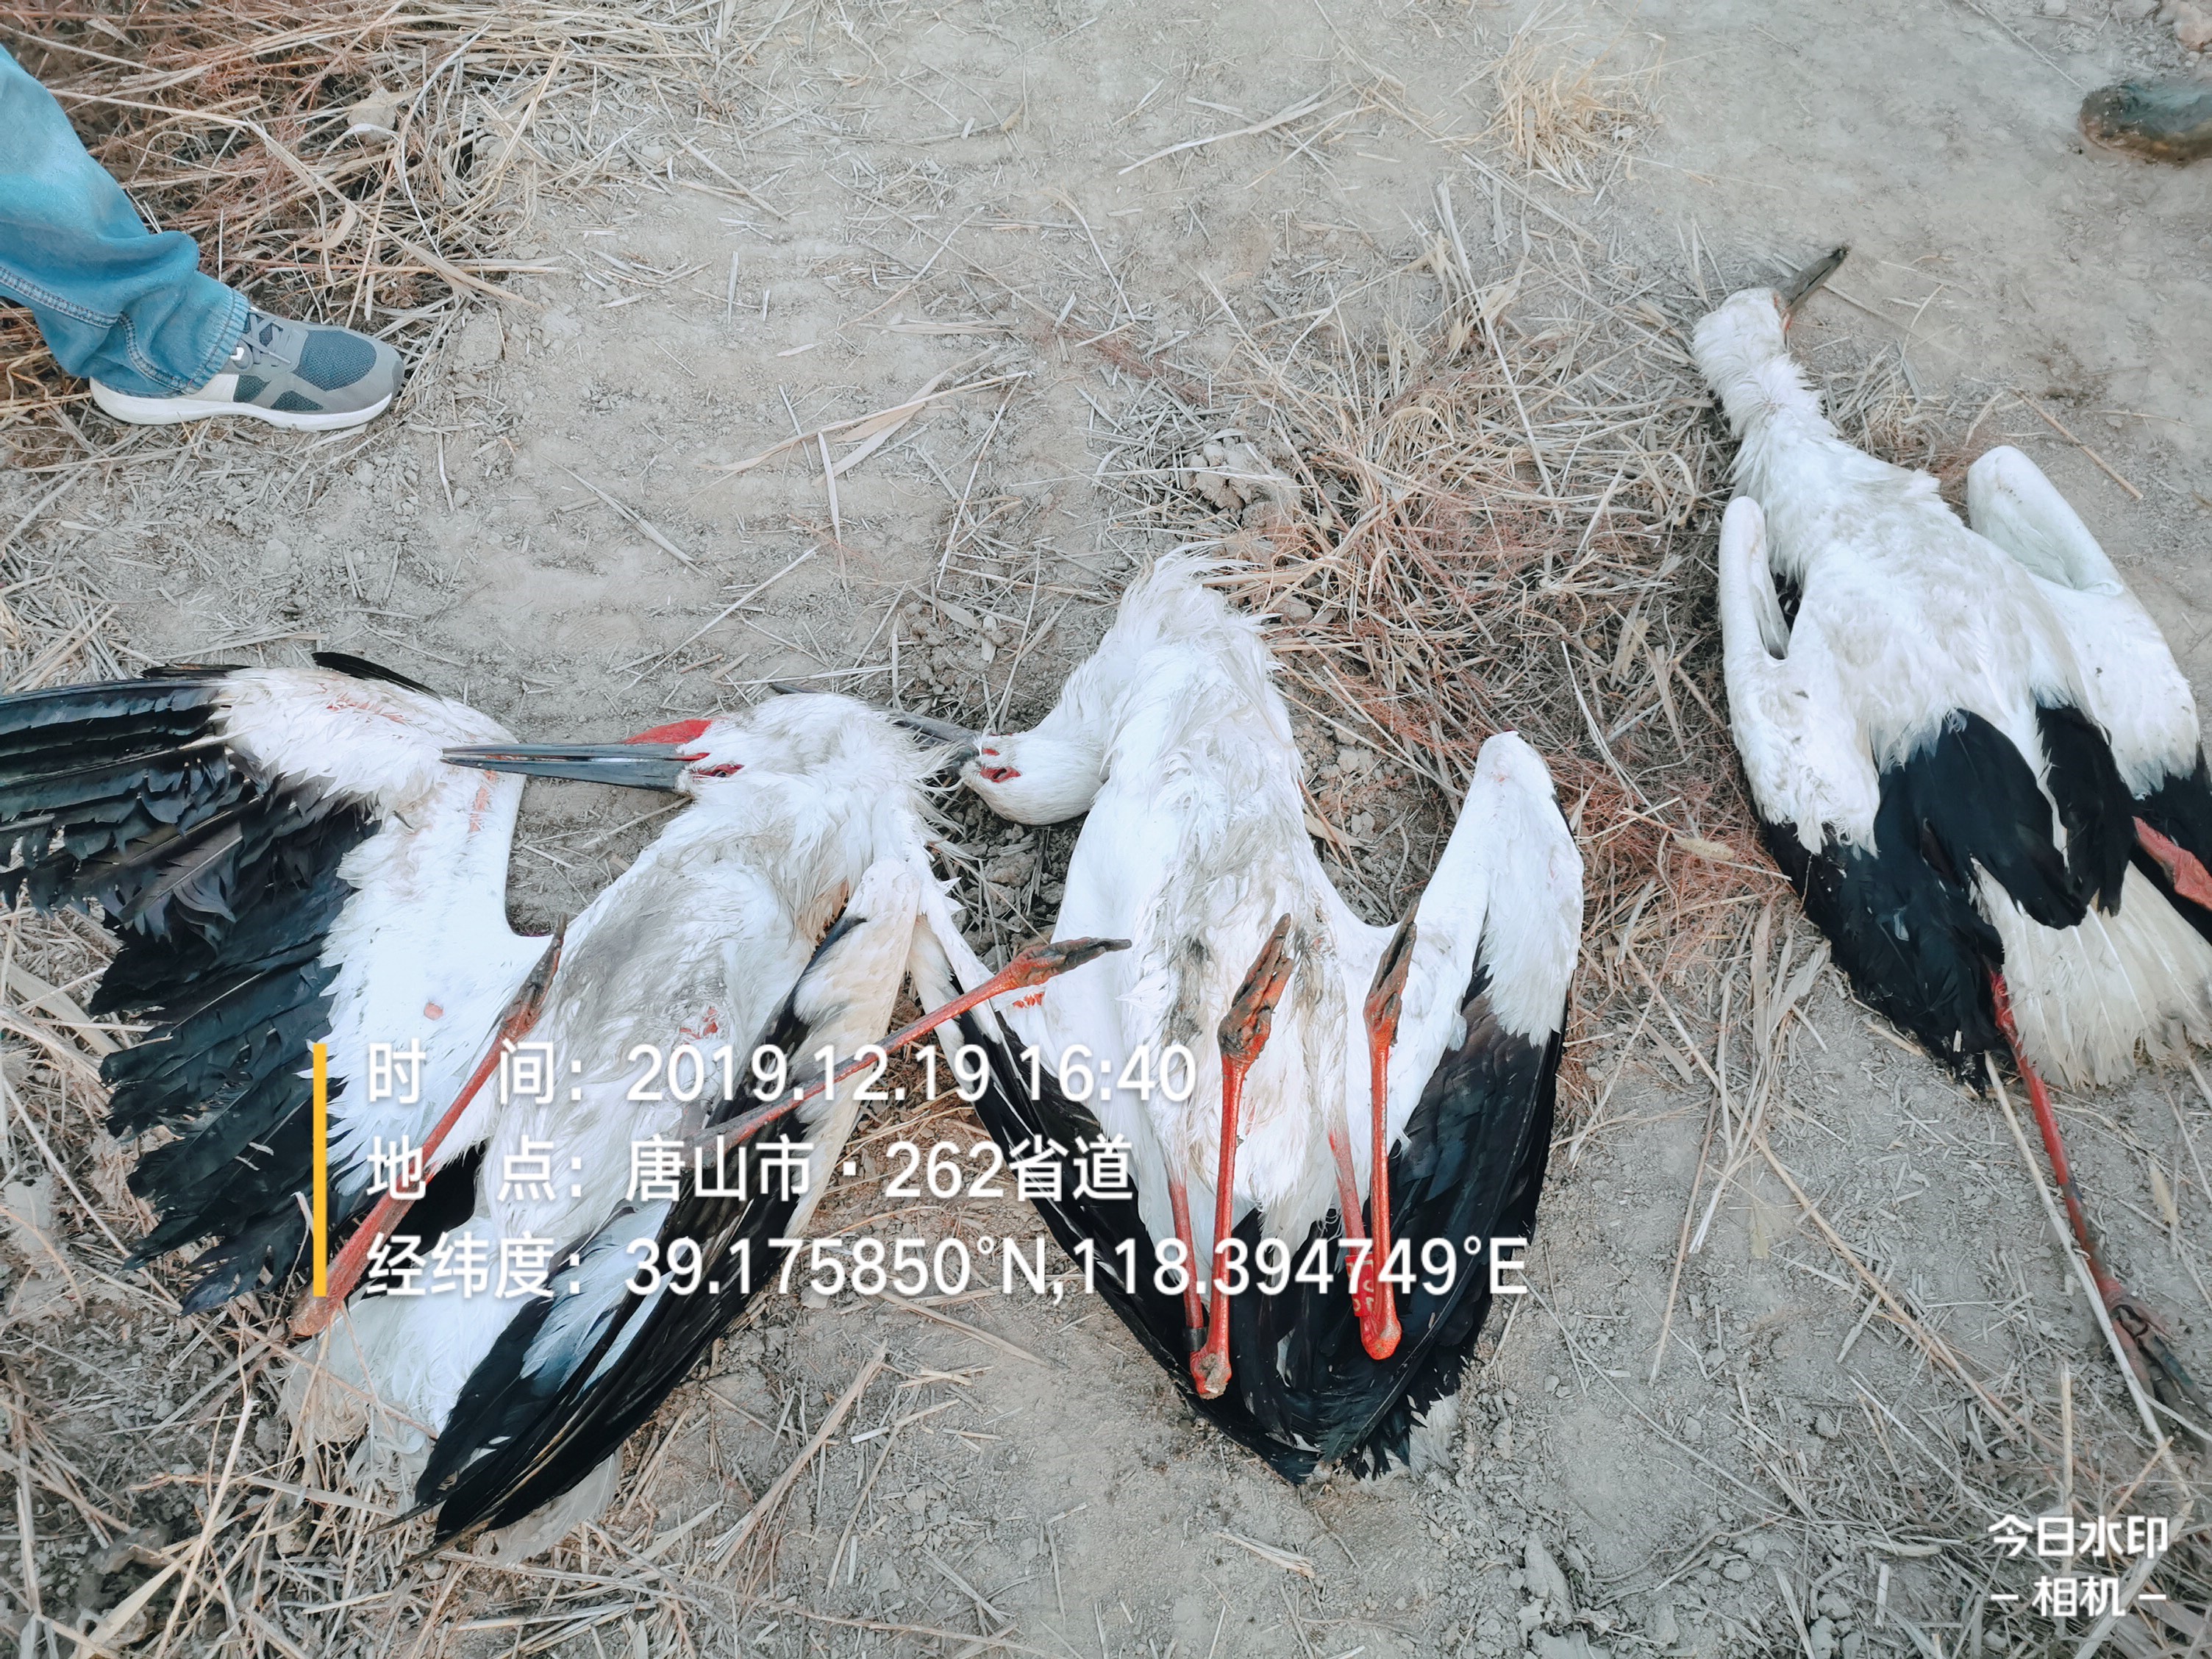 Bodies of Oriental Storks were found in Tangshan on Dec 19th 2019. 